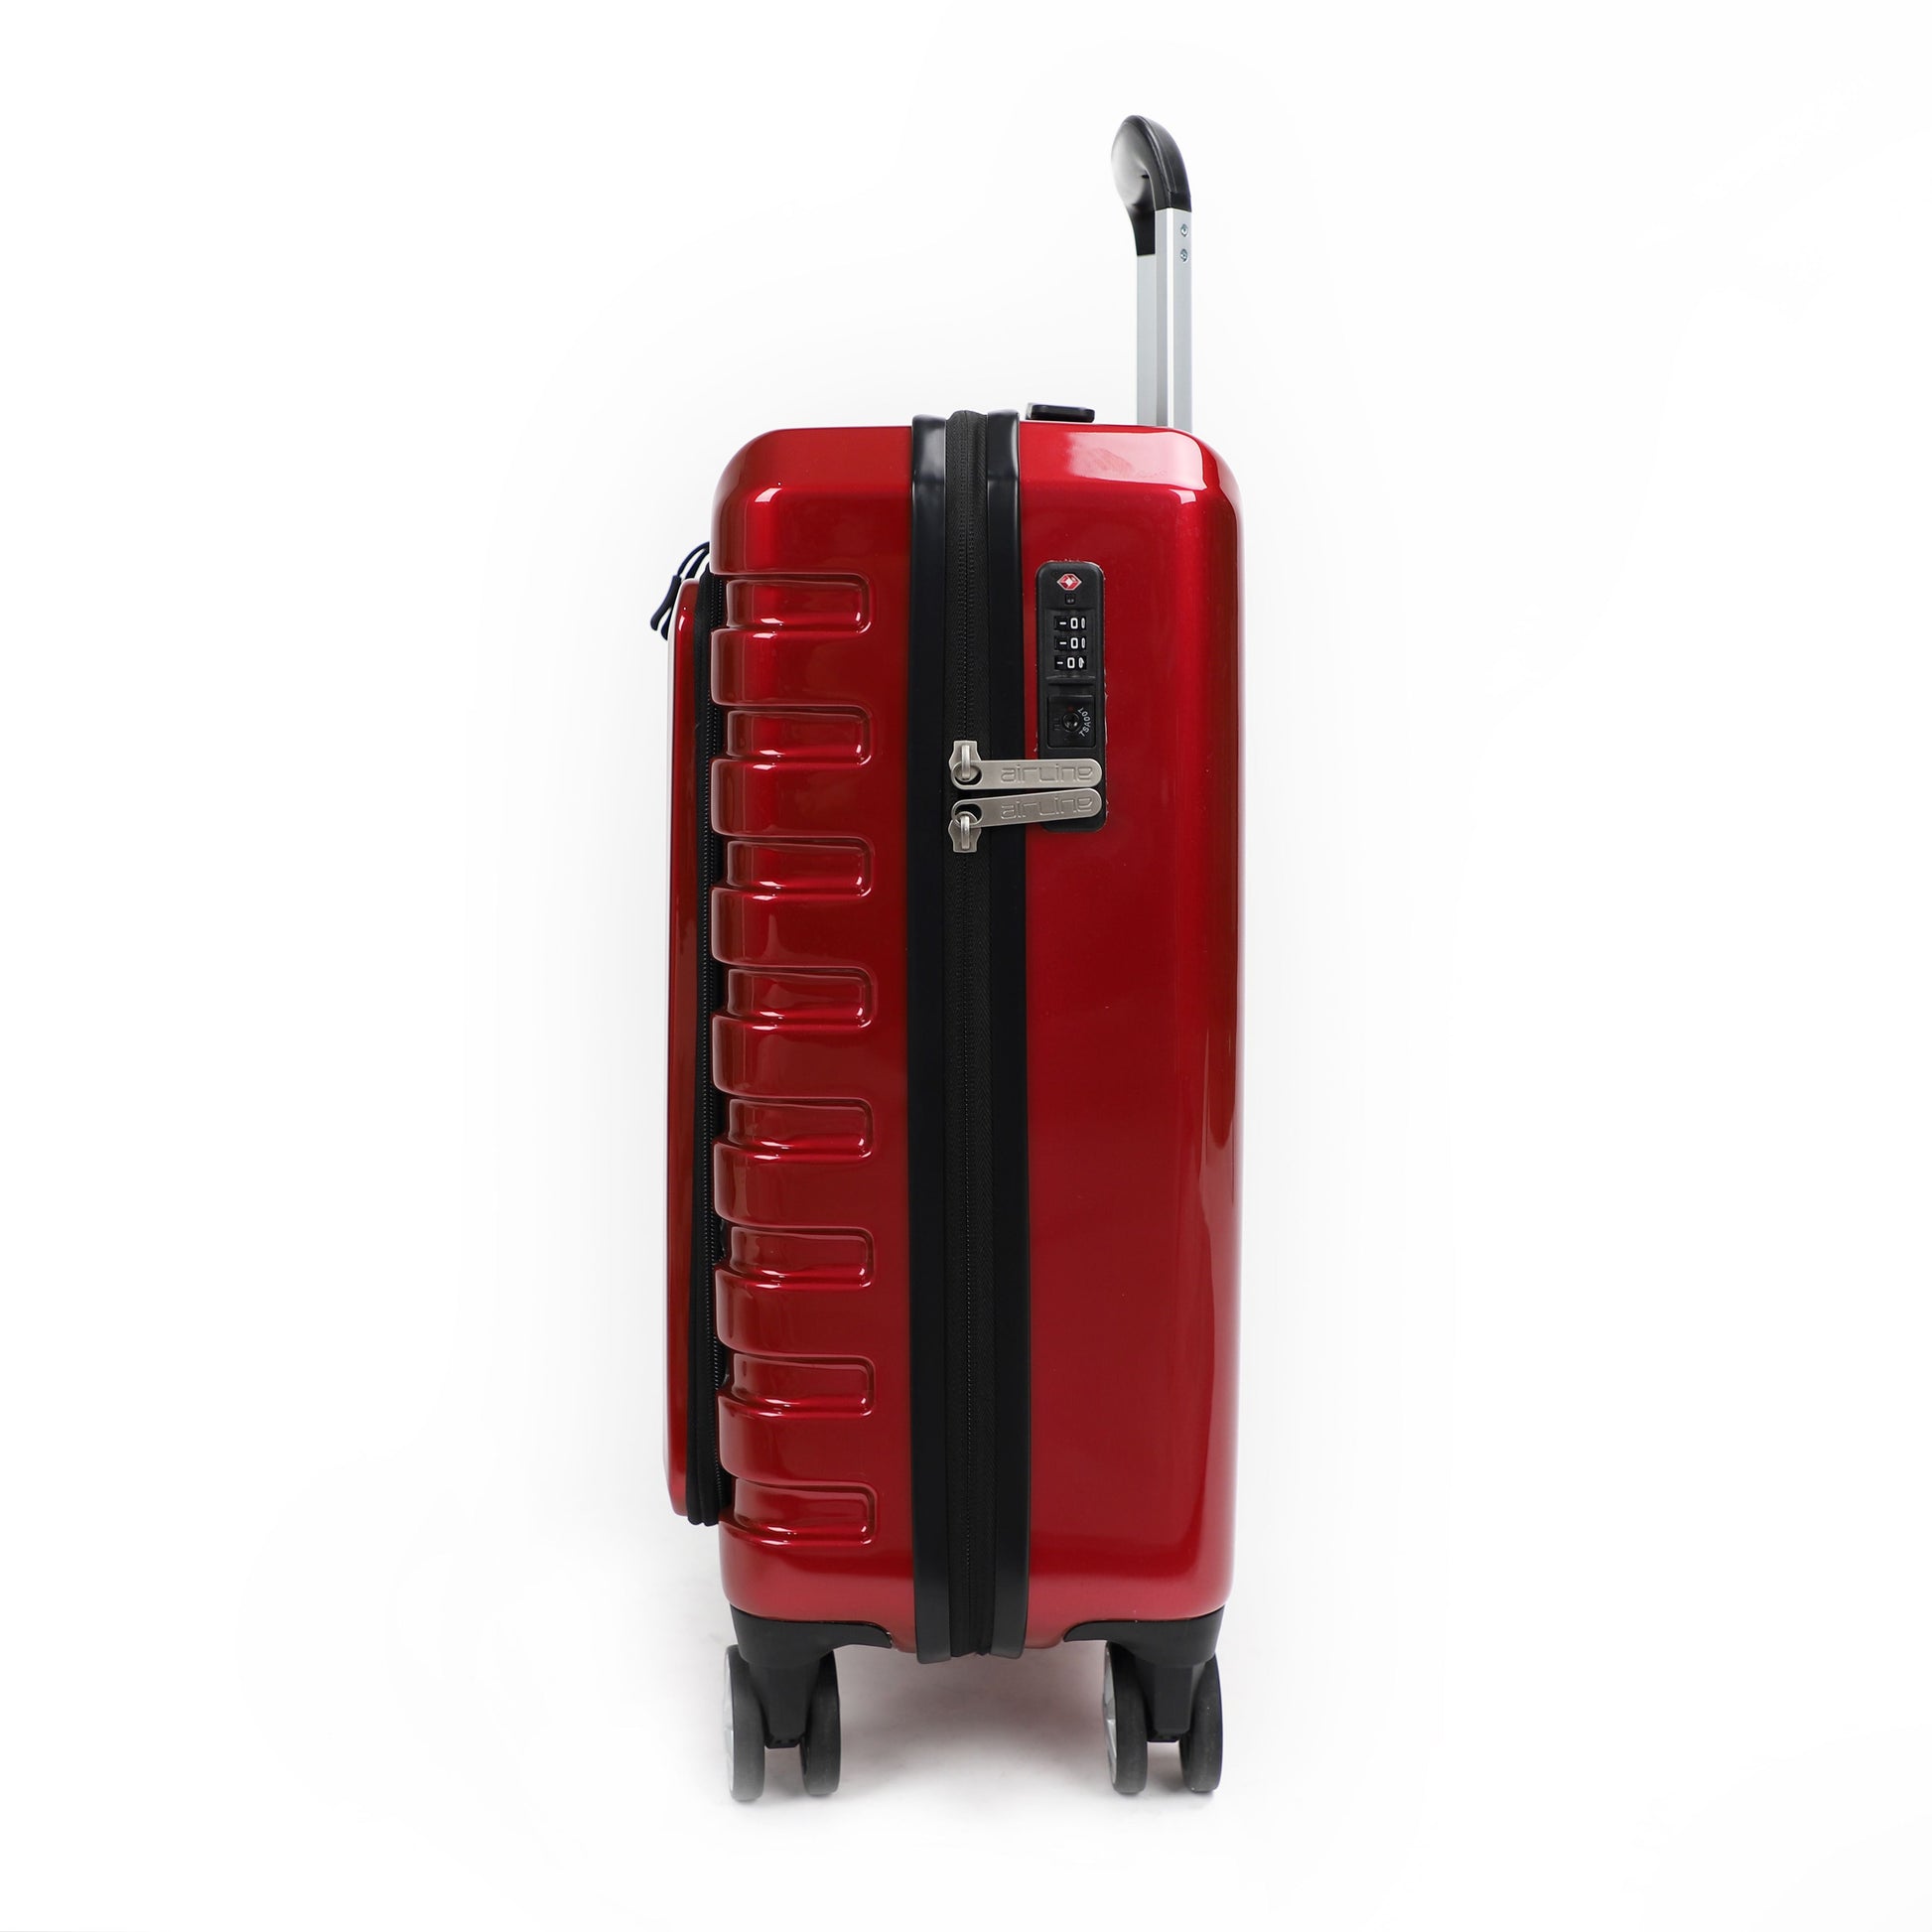 Airline_Carry_On_Luggage_Red_right_view_T1978155002